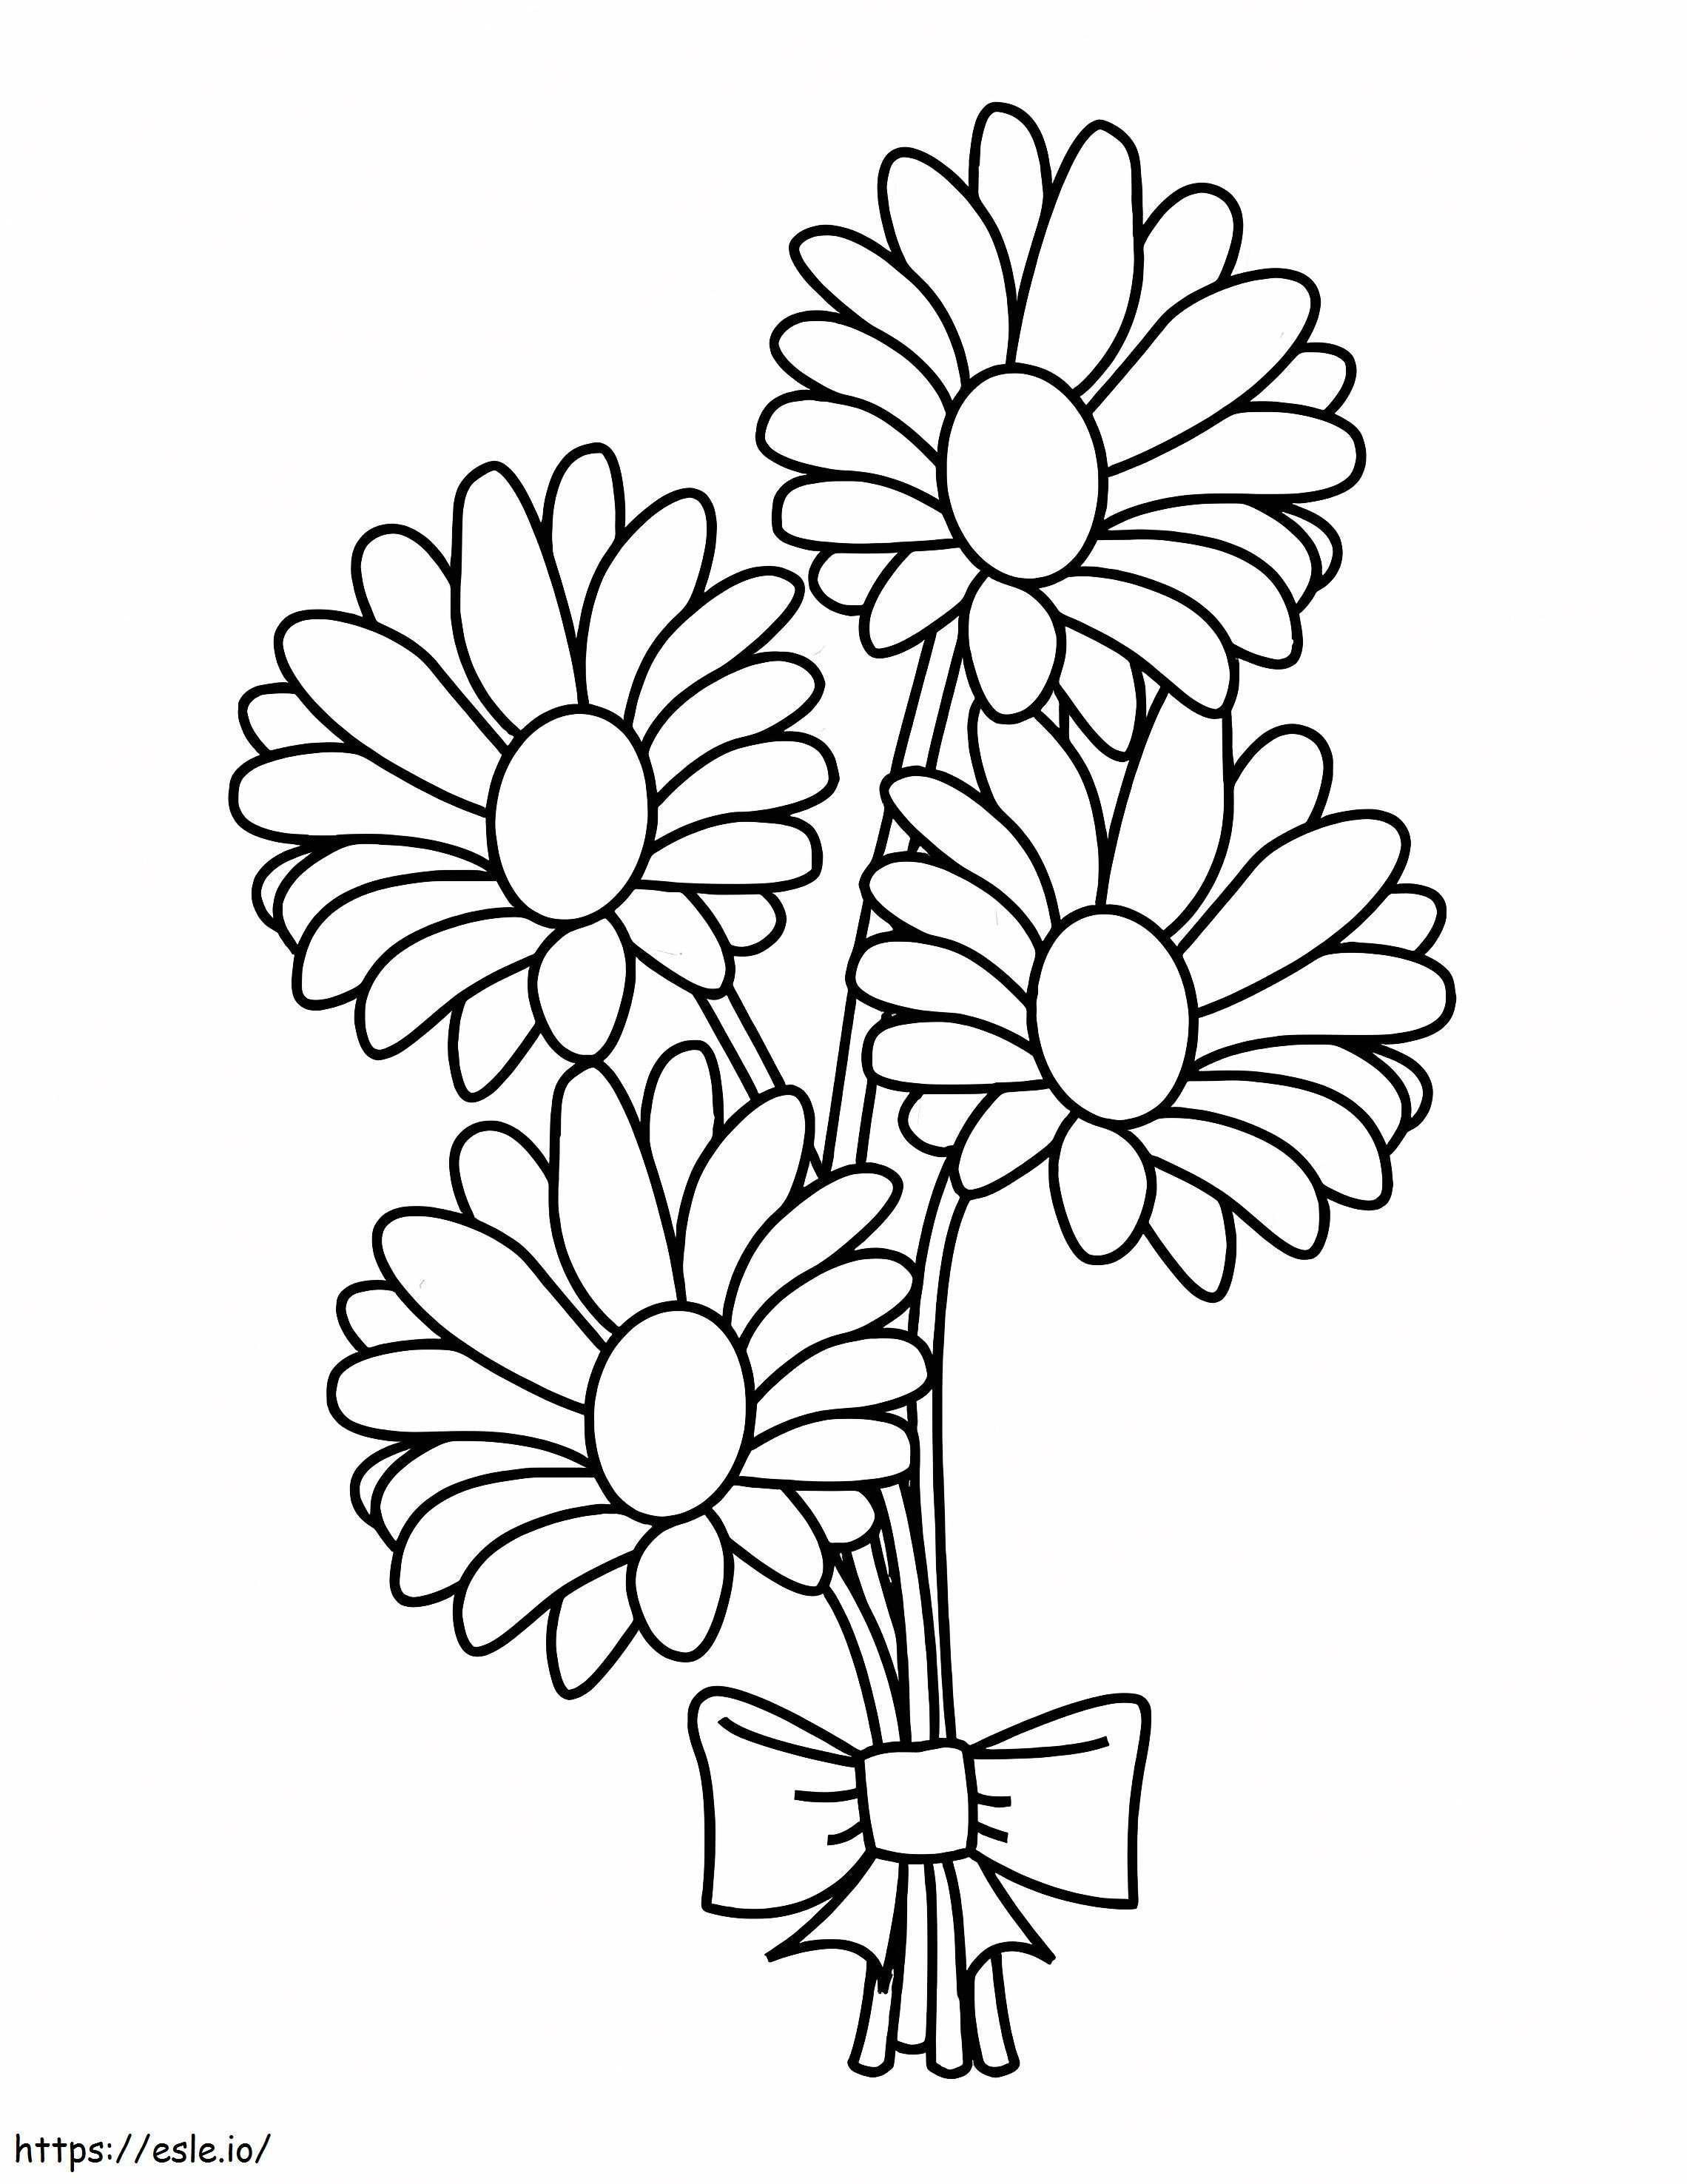 Bouquet Of Daisies coloring page